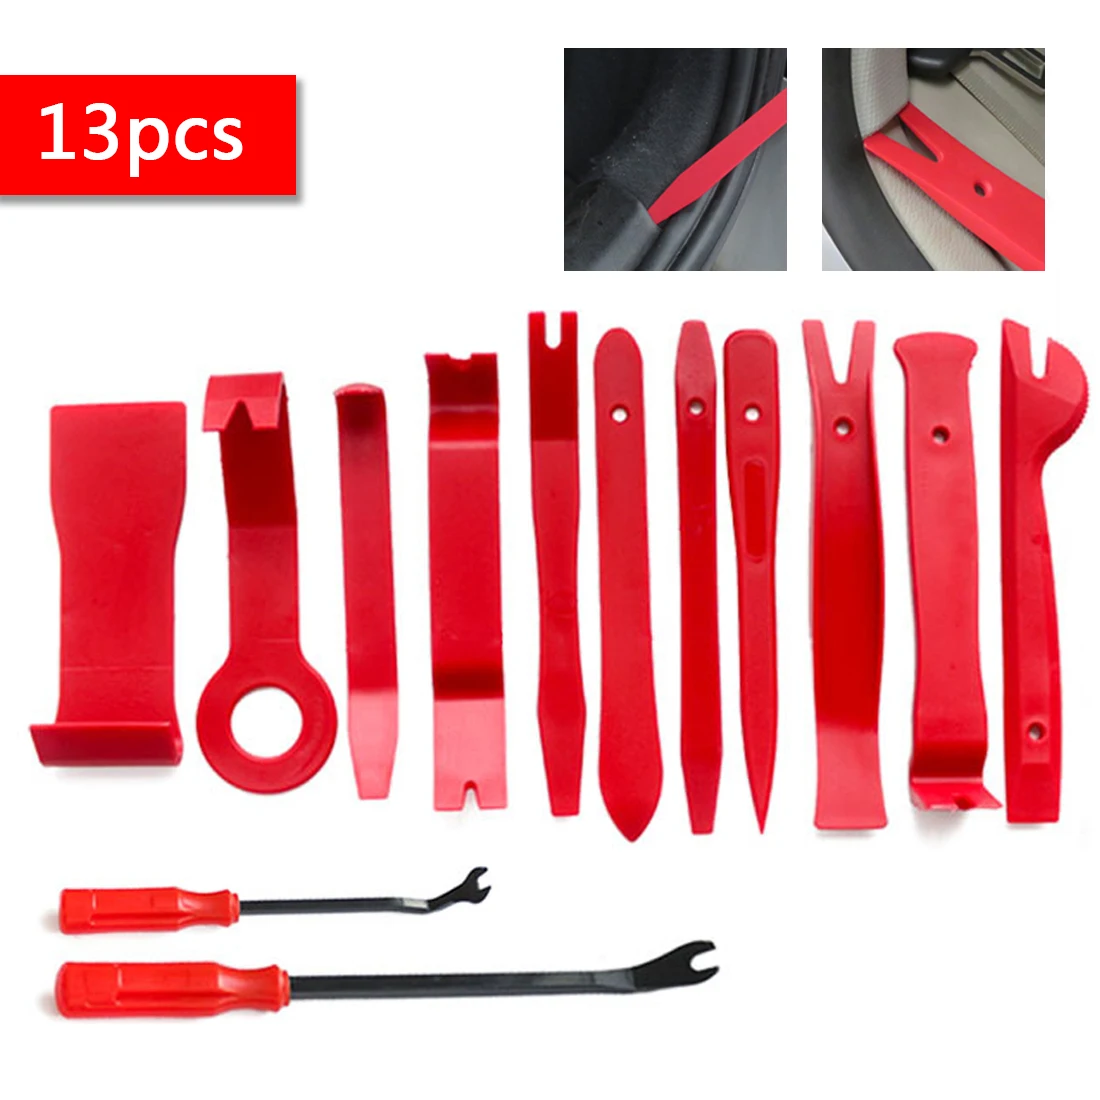 13pcs/set Plastic Pry Tool Trim Dashboard Panel Removal Installer for PC Phone M 